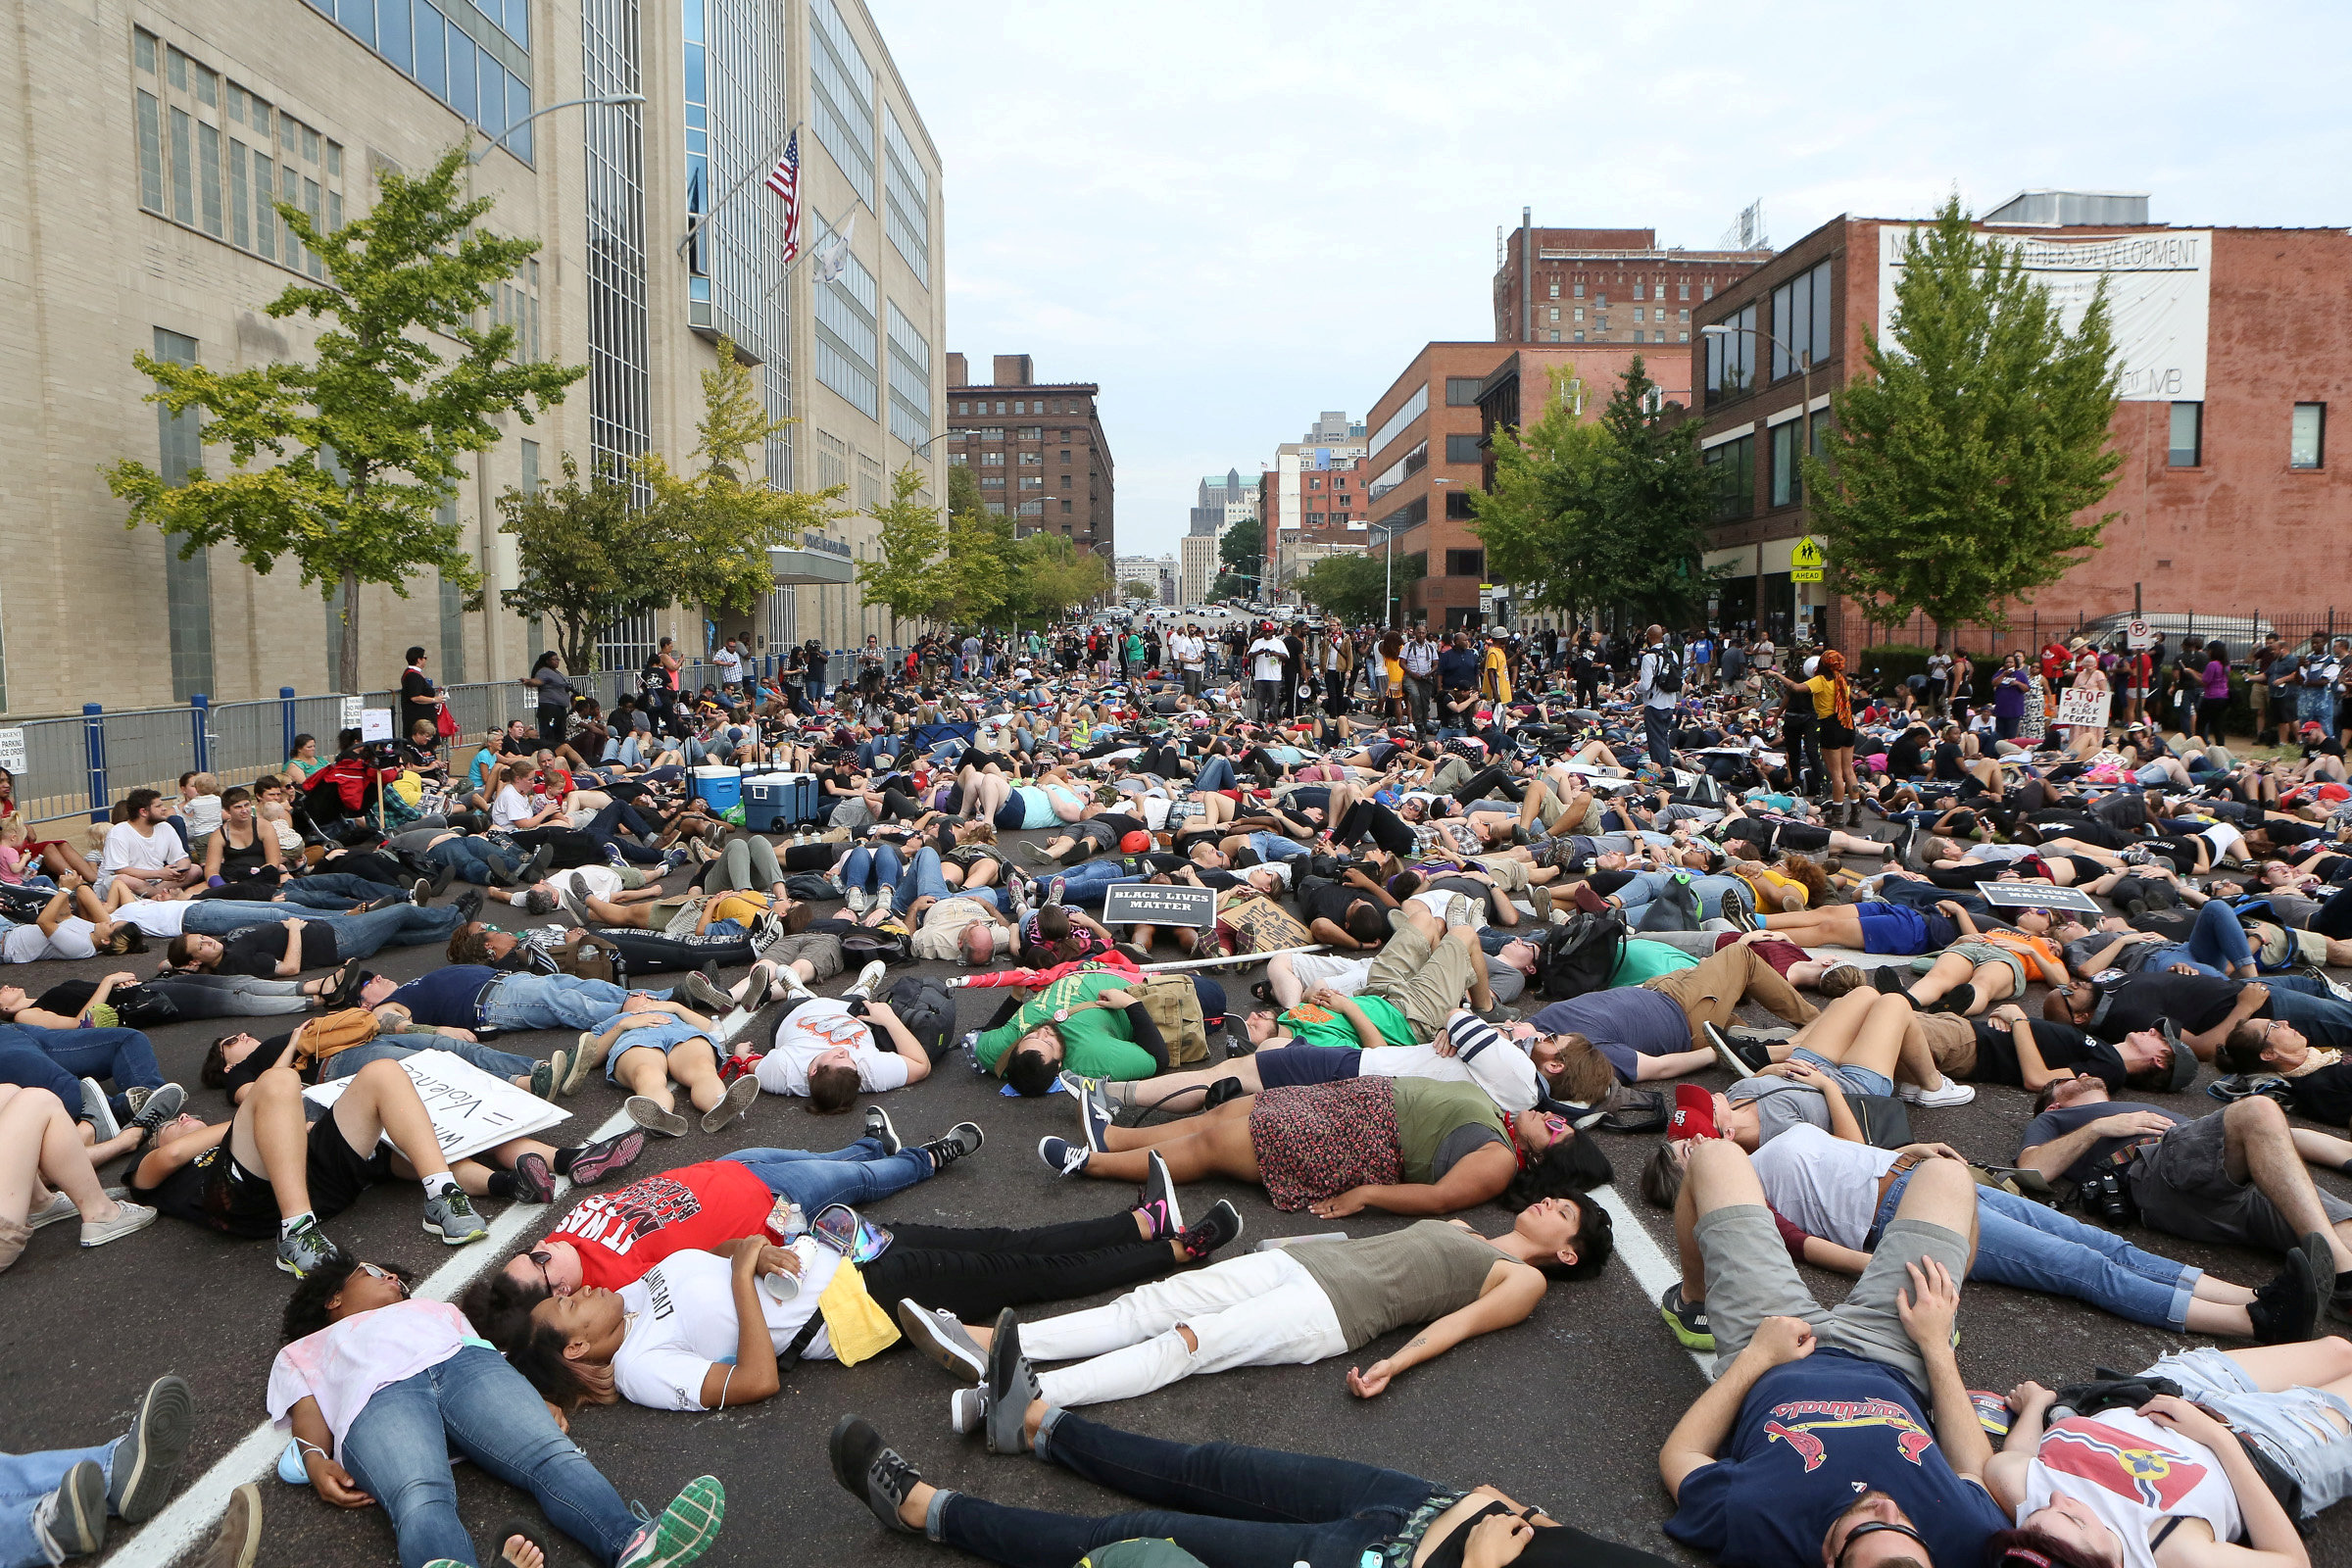 PHOTO: Protesters stage a "die-in" during a rally outside the police headquarters in St. Louis, Sept. 17, 2017.  